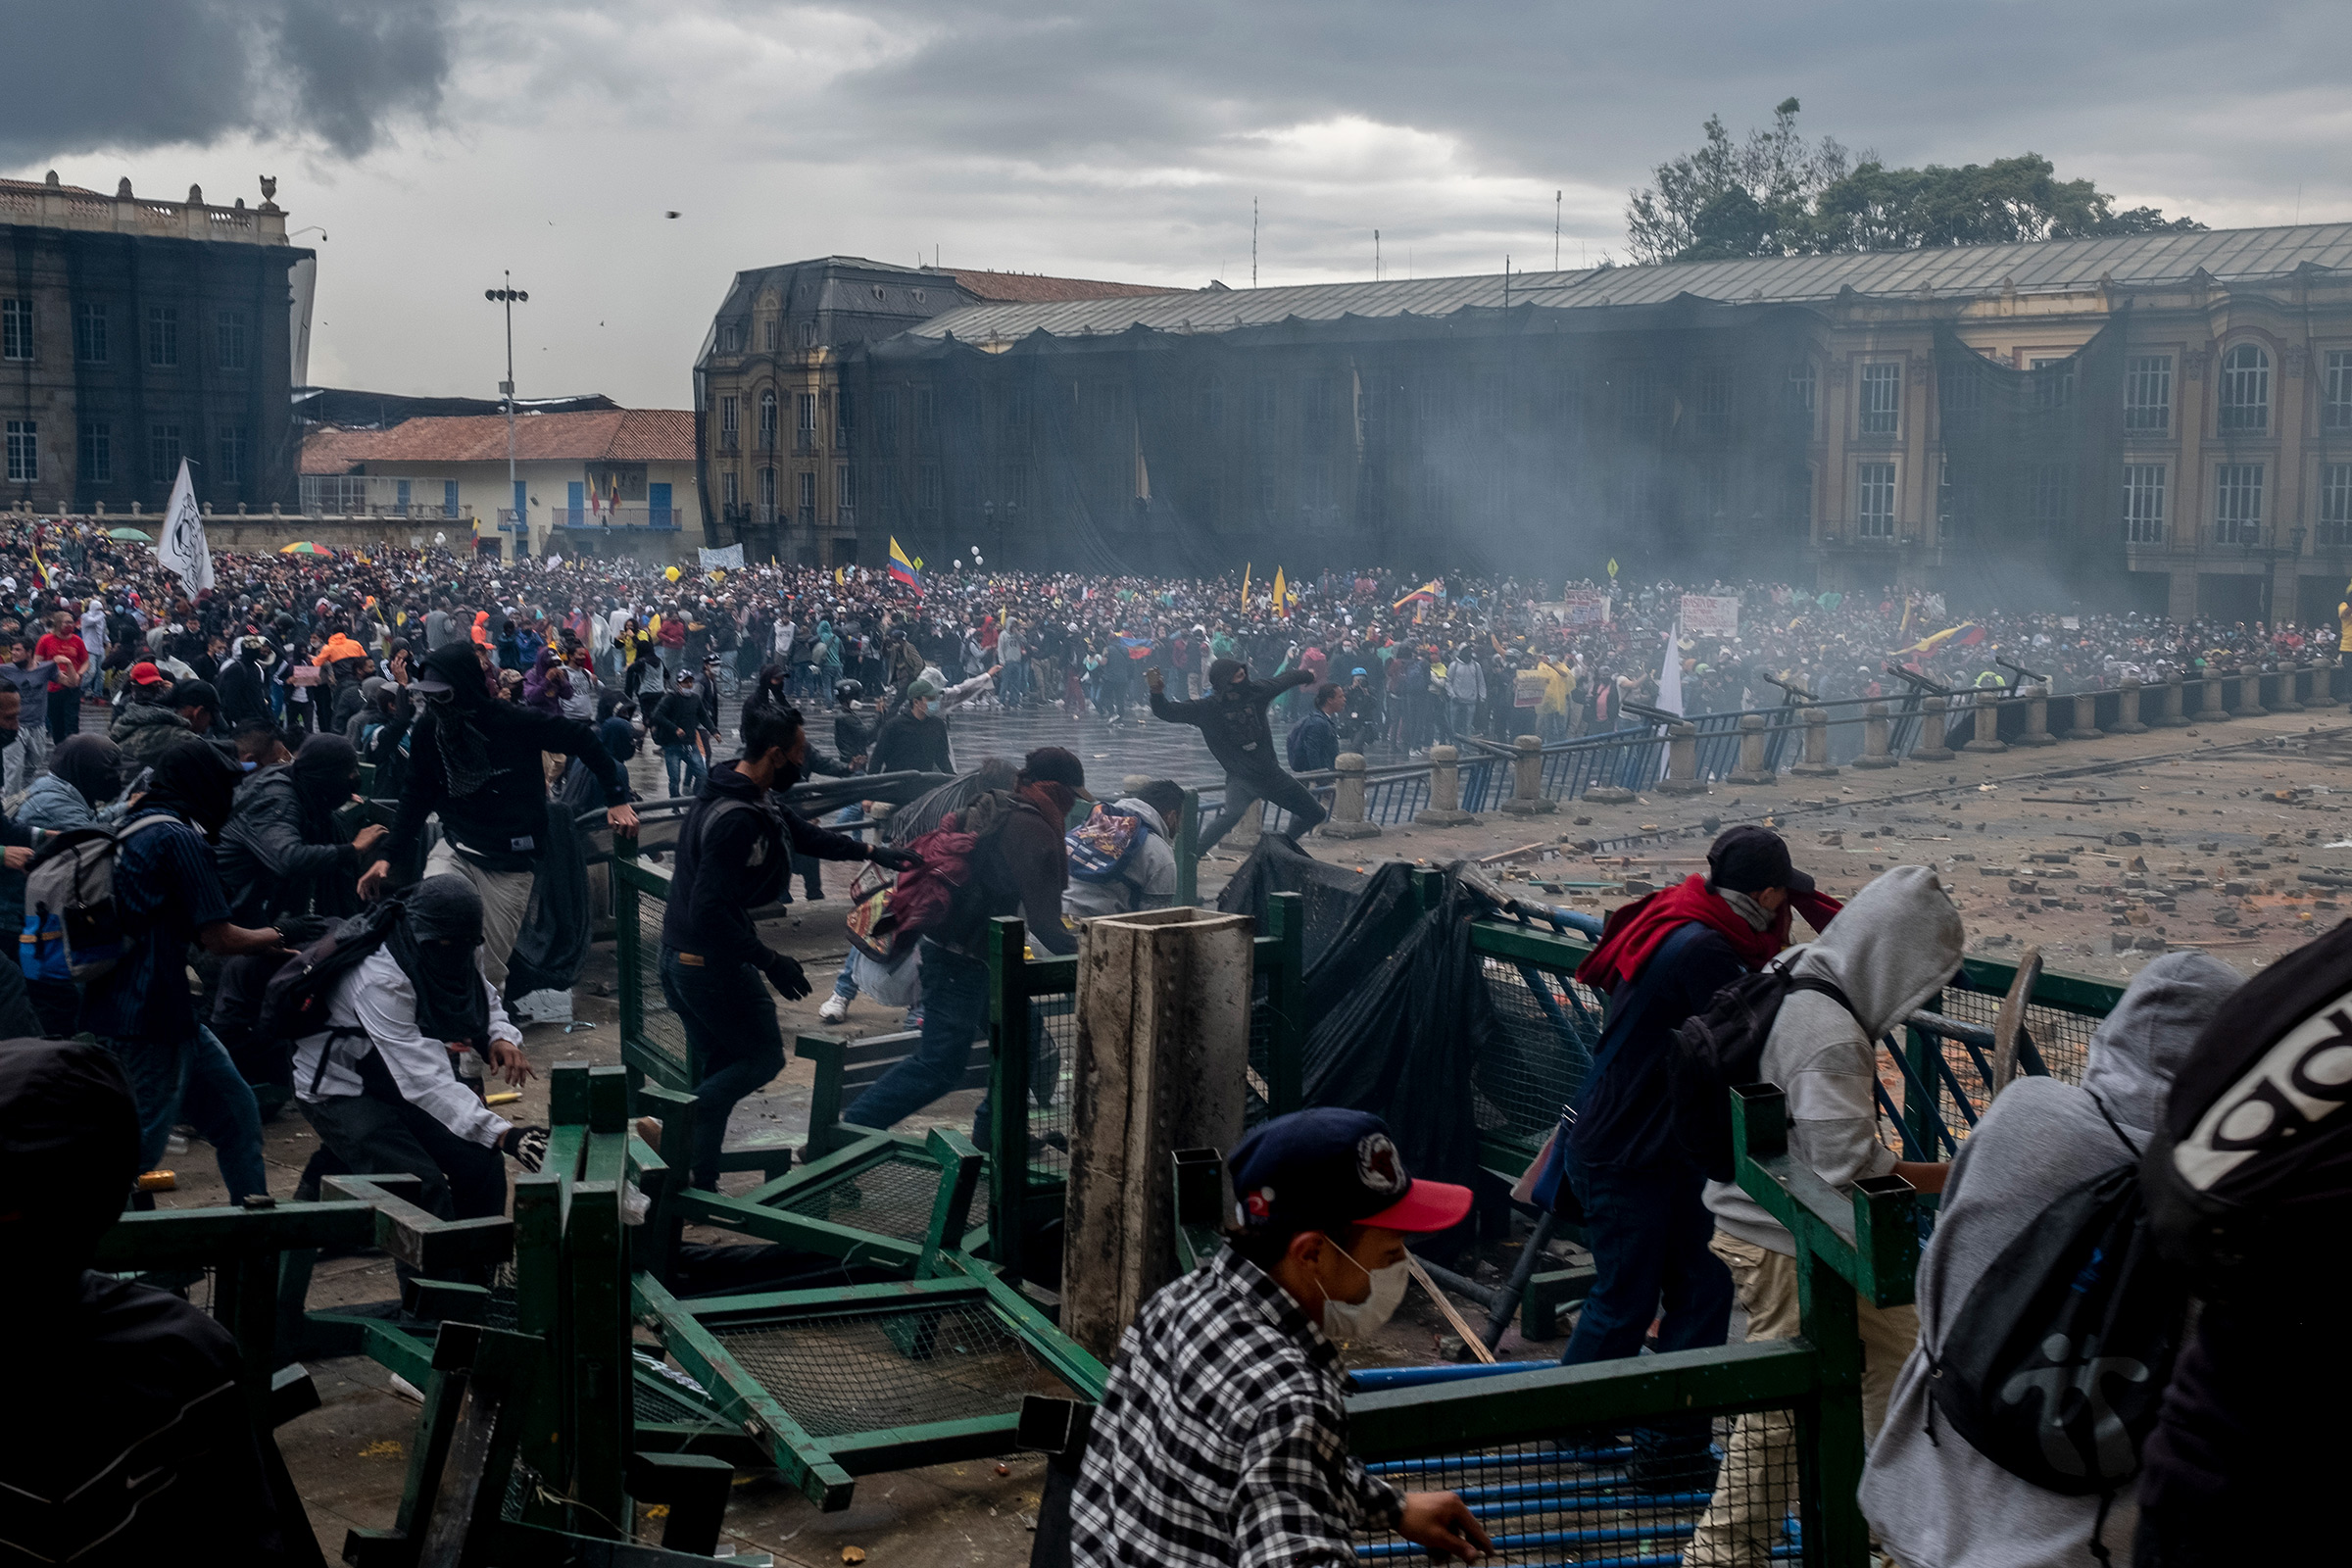 Protesters run up against barricades in Bogotá on April 28. (Santiago Mesa—Reojo Colectivo)